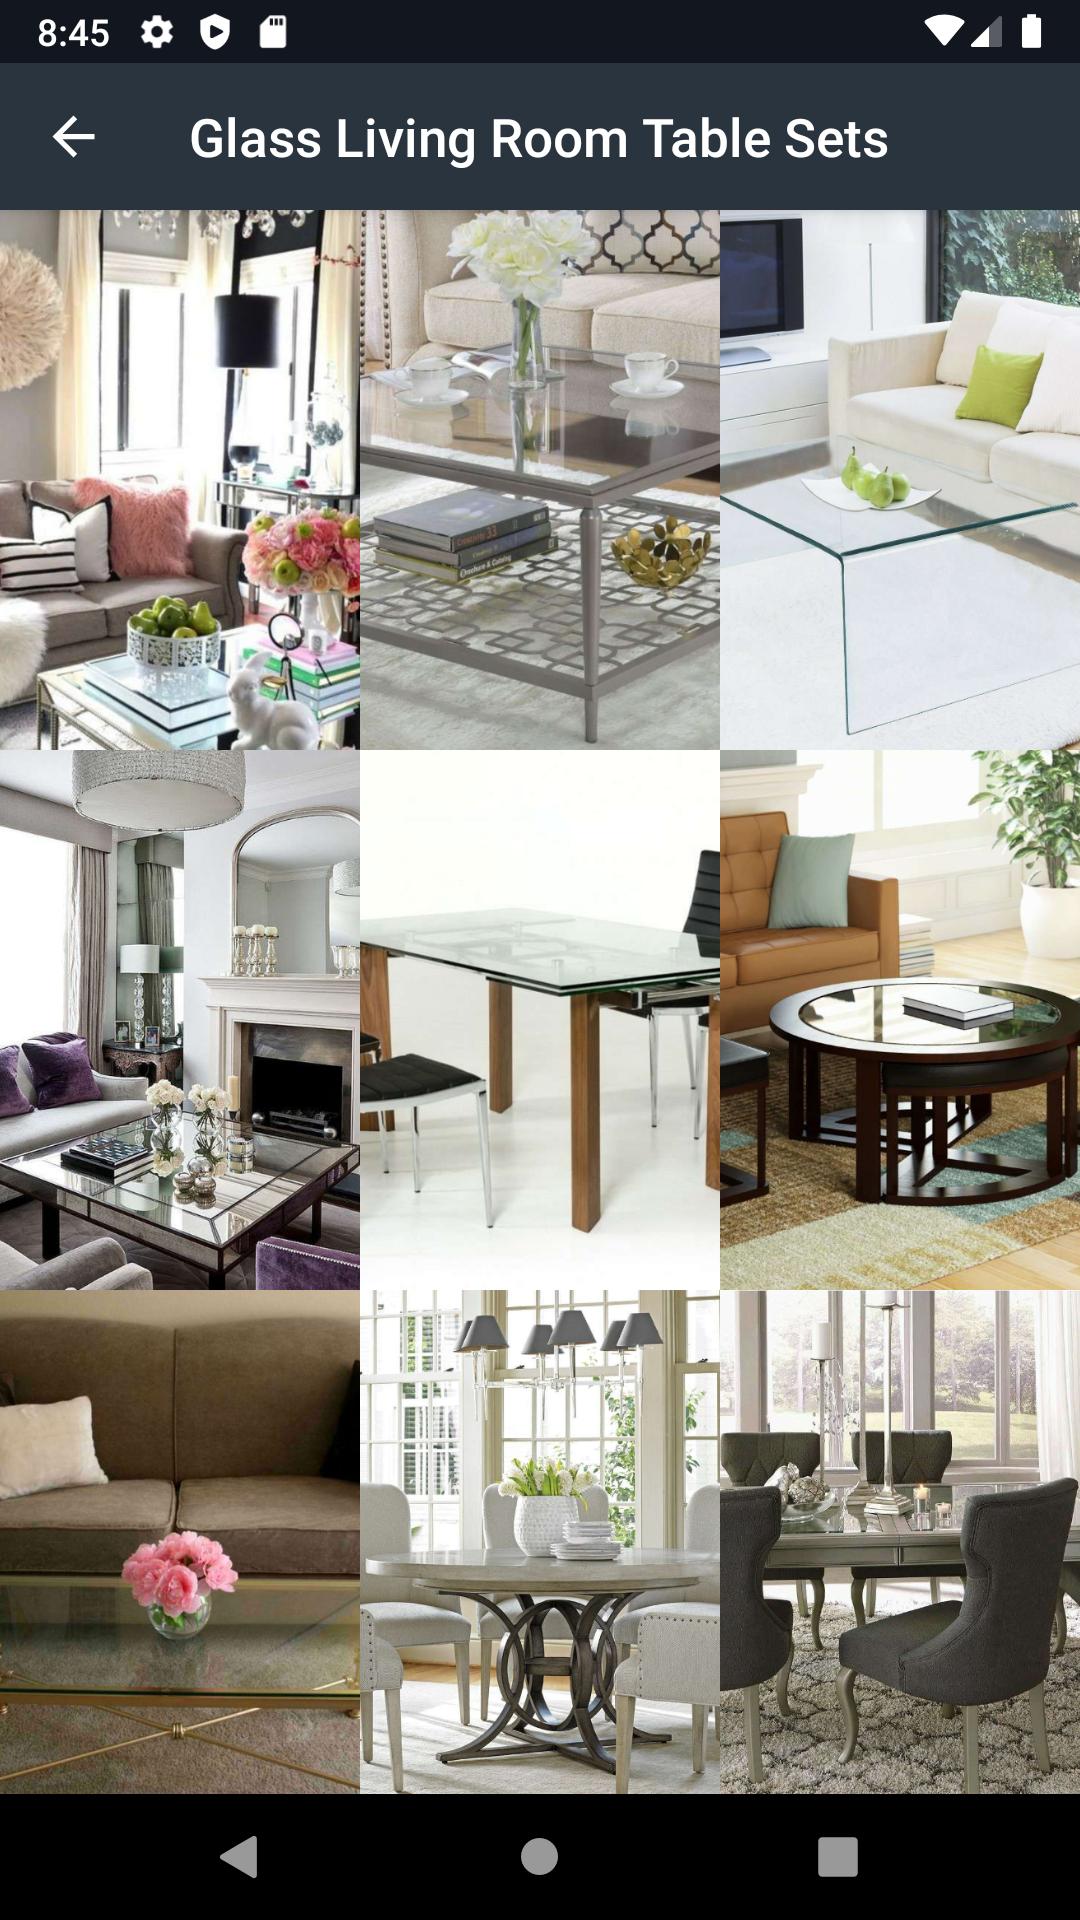 Glass Living Room Table Sets For Android APK Download